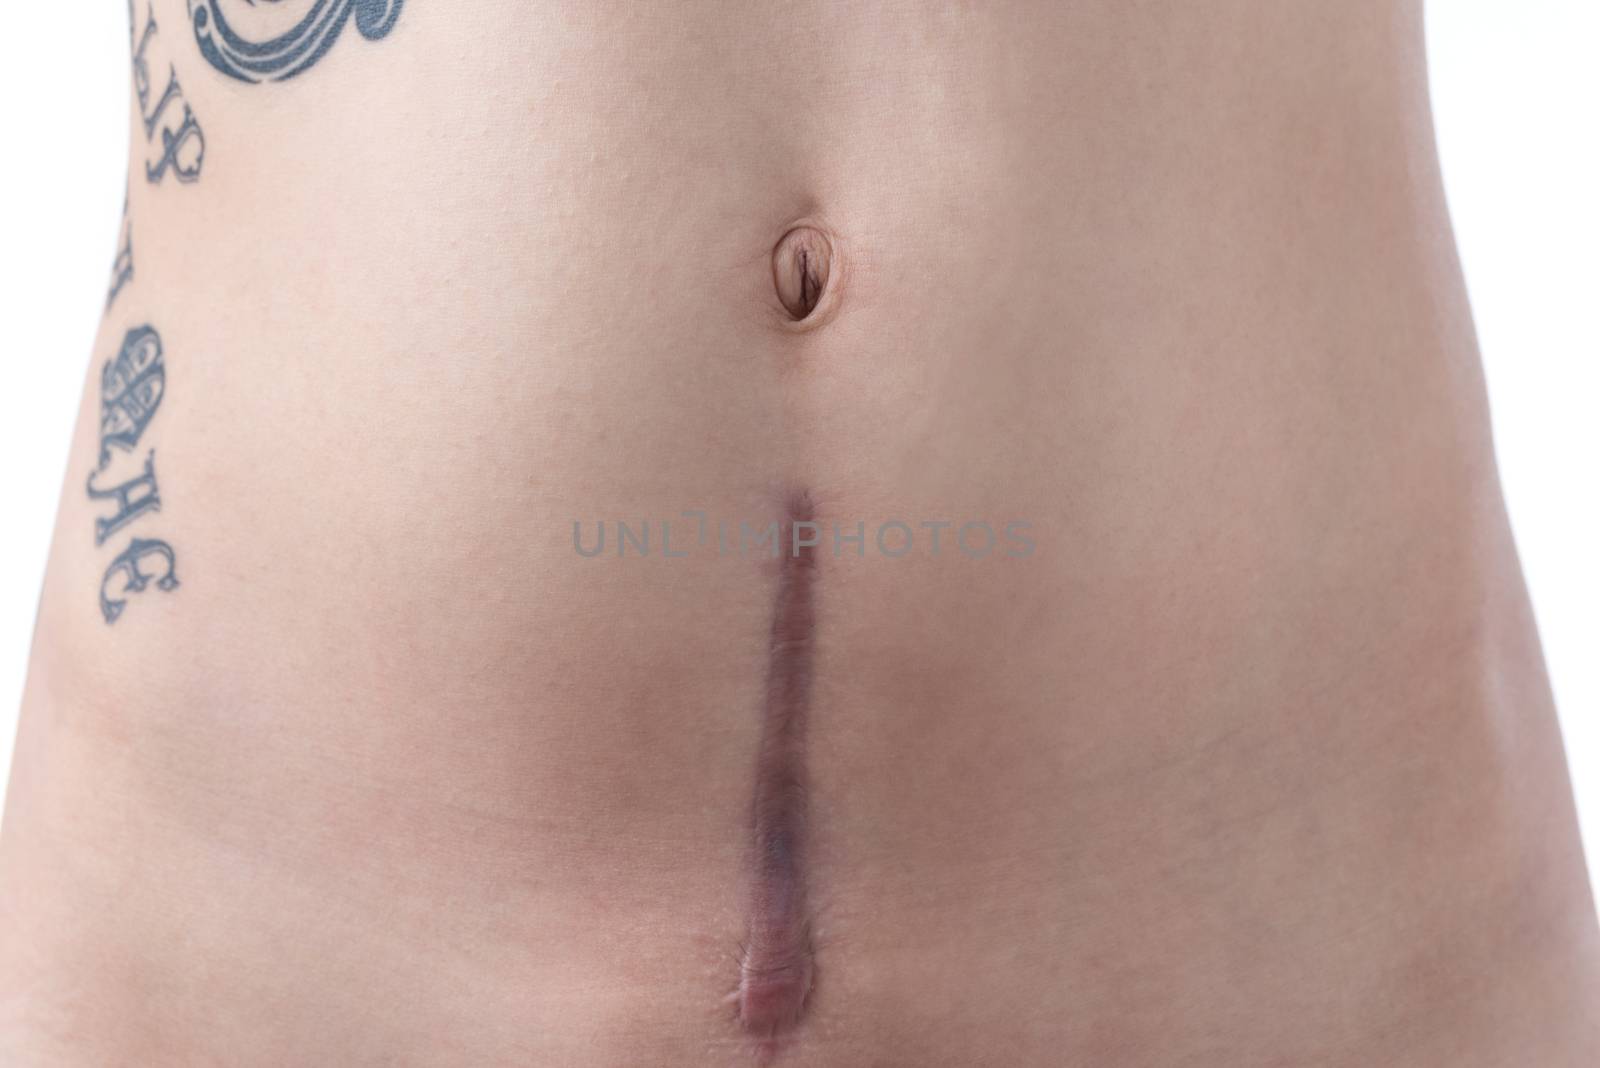 A woman with a tattoo's scar from a c-section birth on a white background.